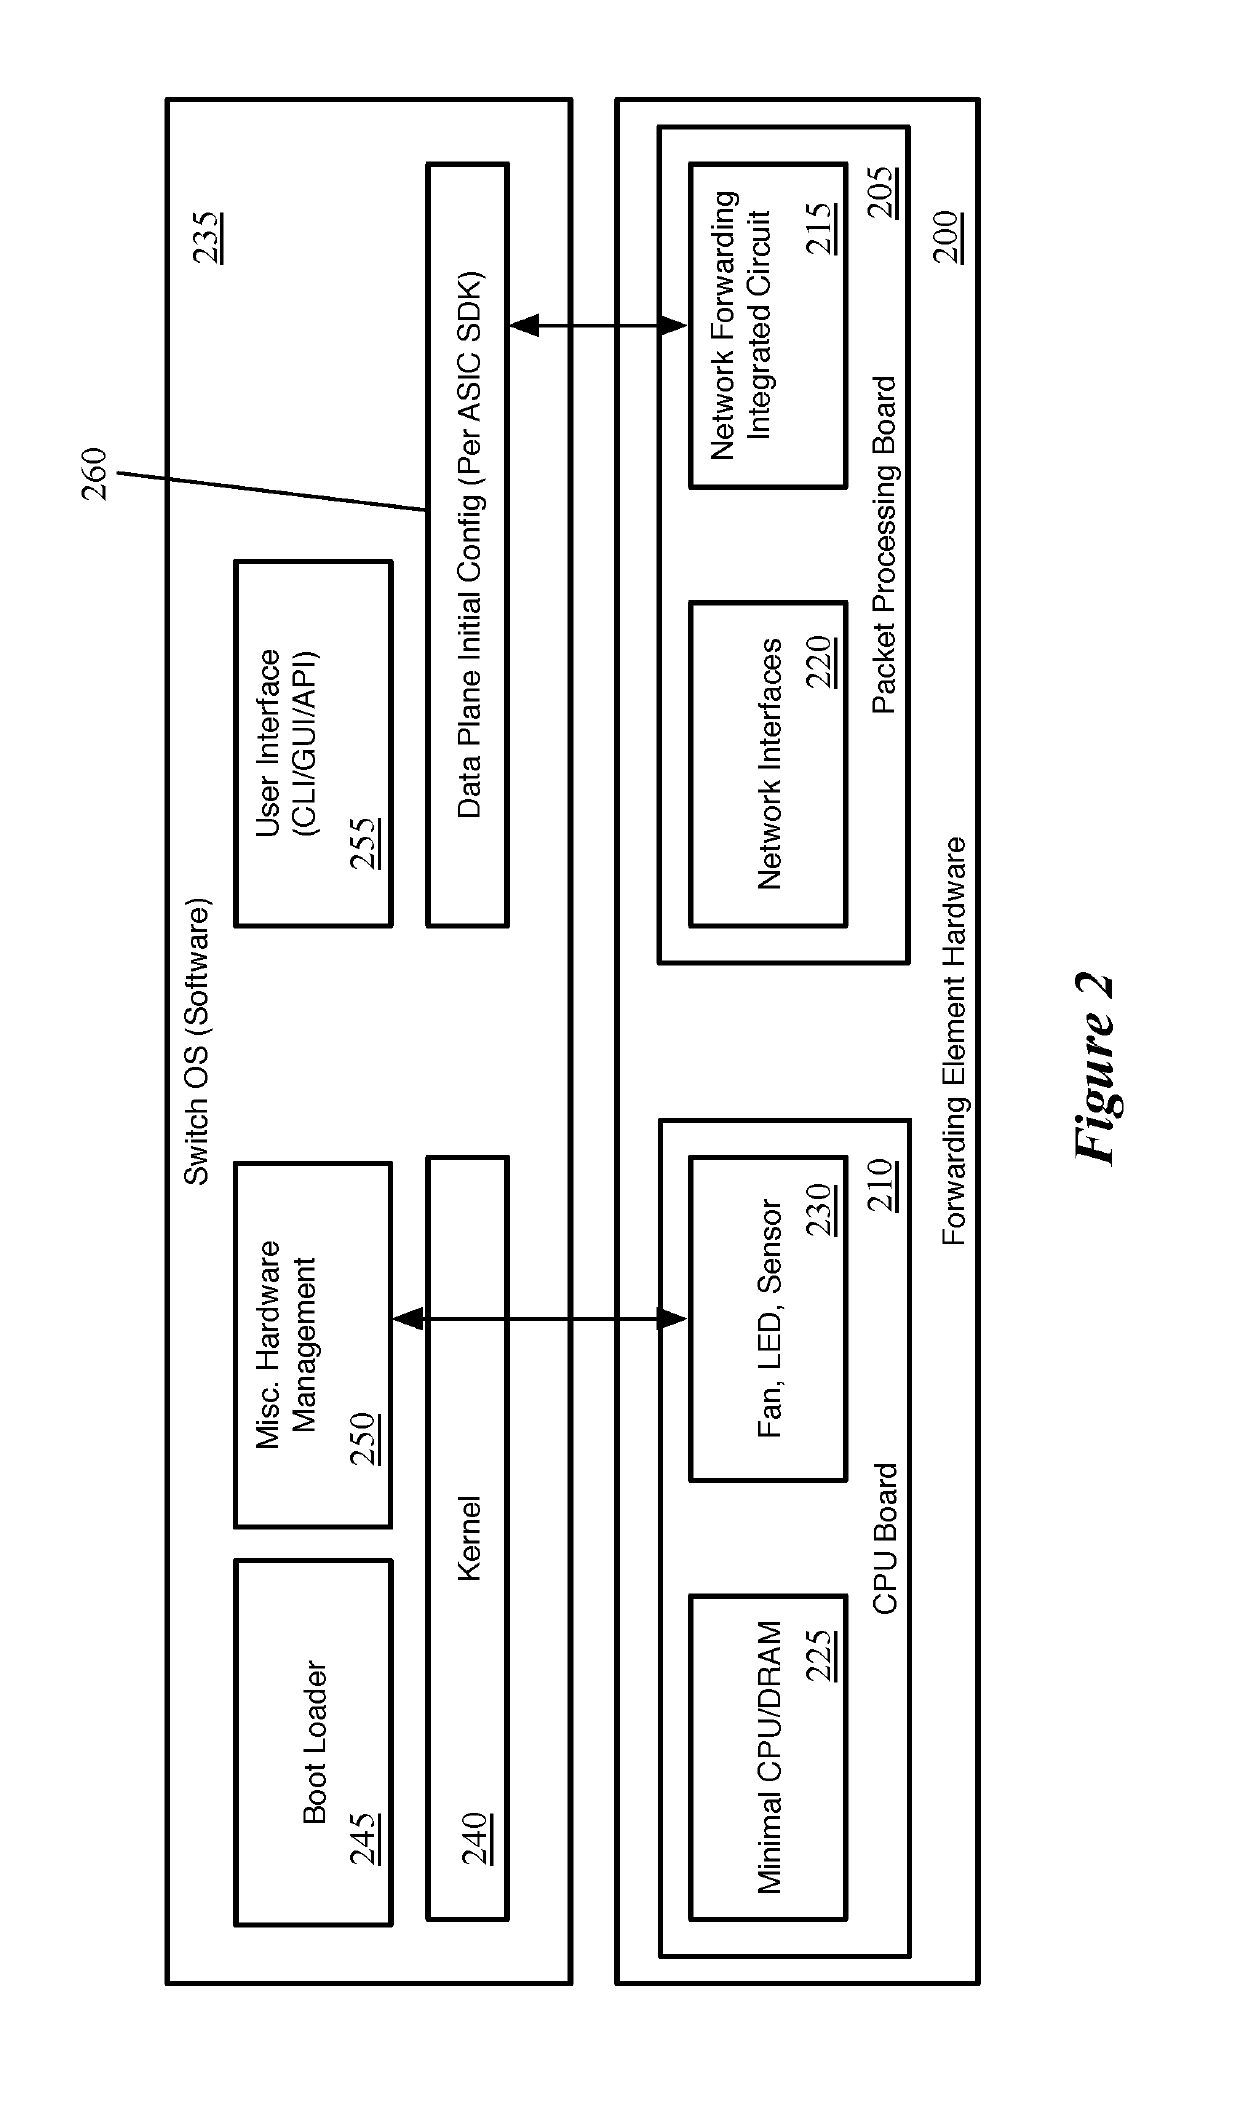 Execution of Packet-Specified Actions at Forwarding Element